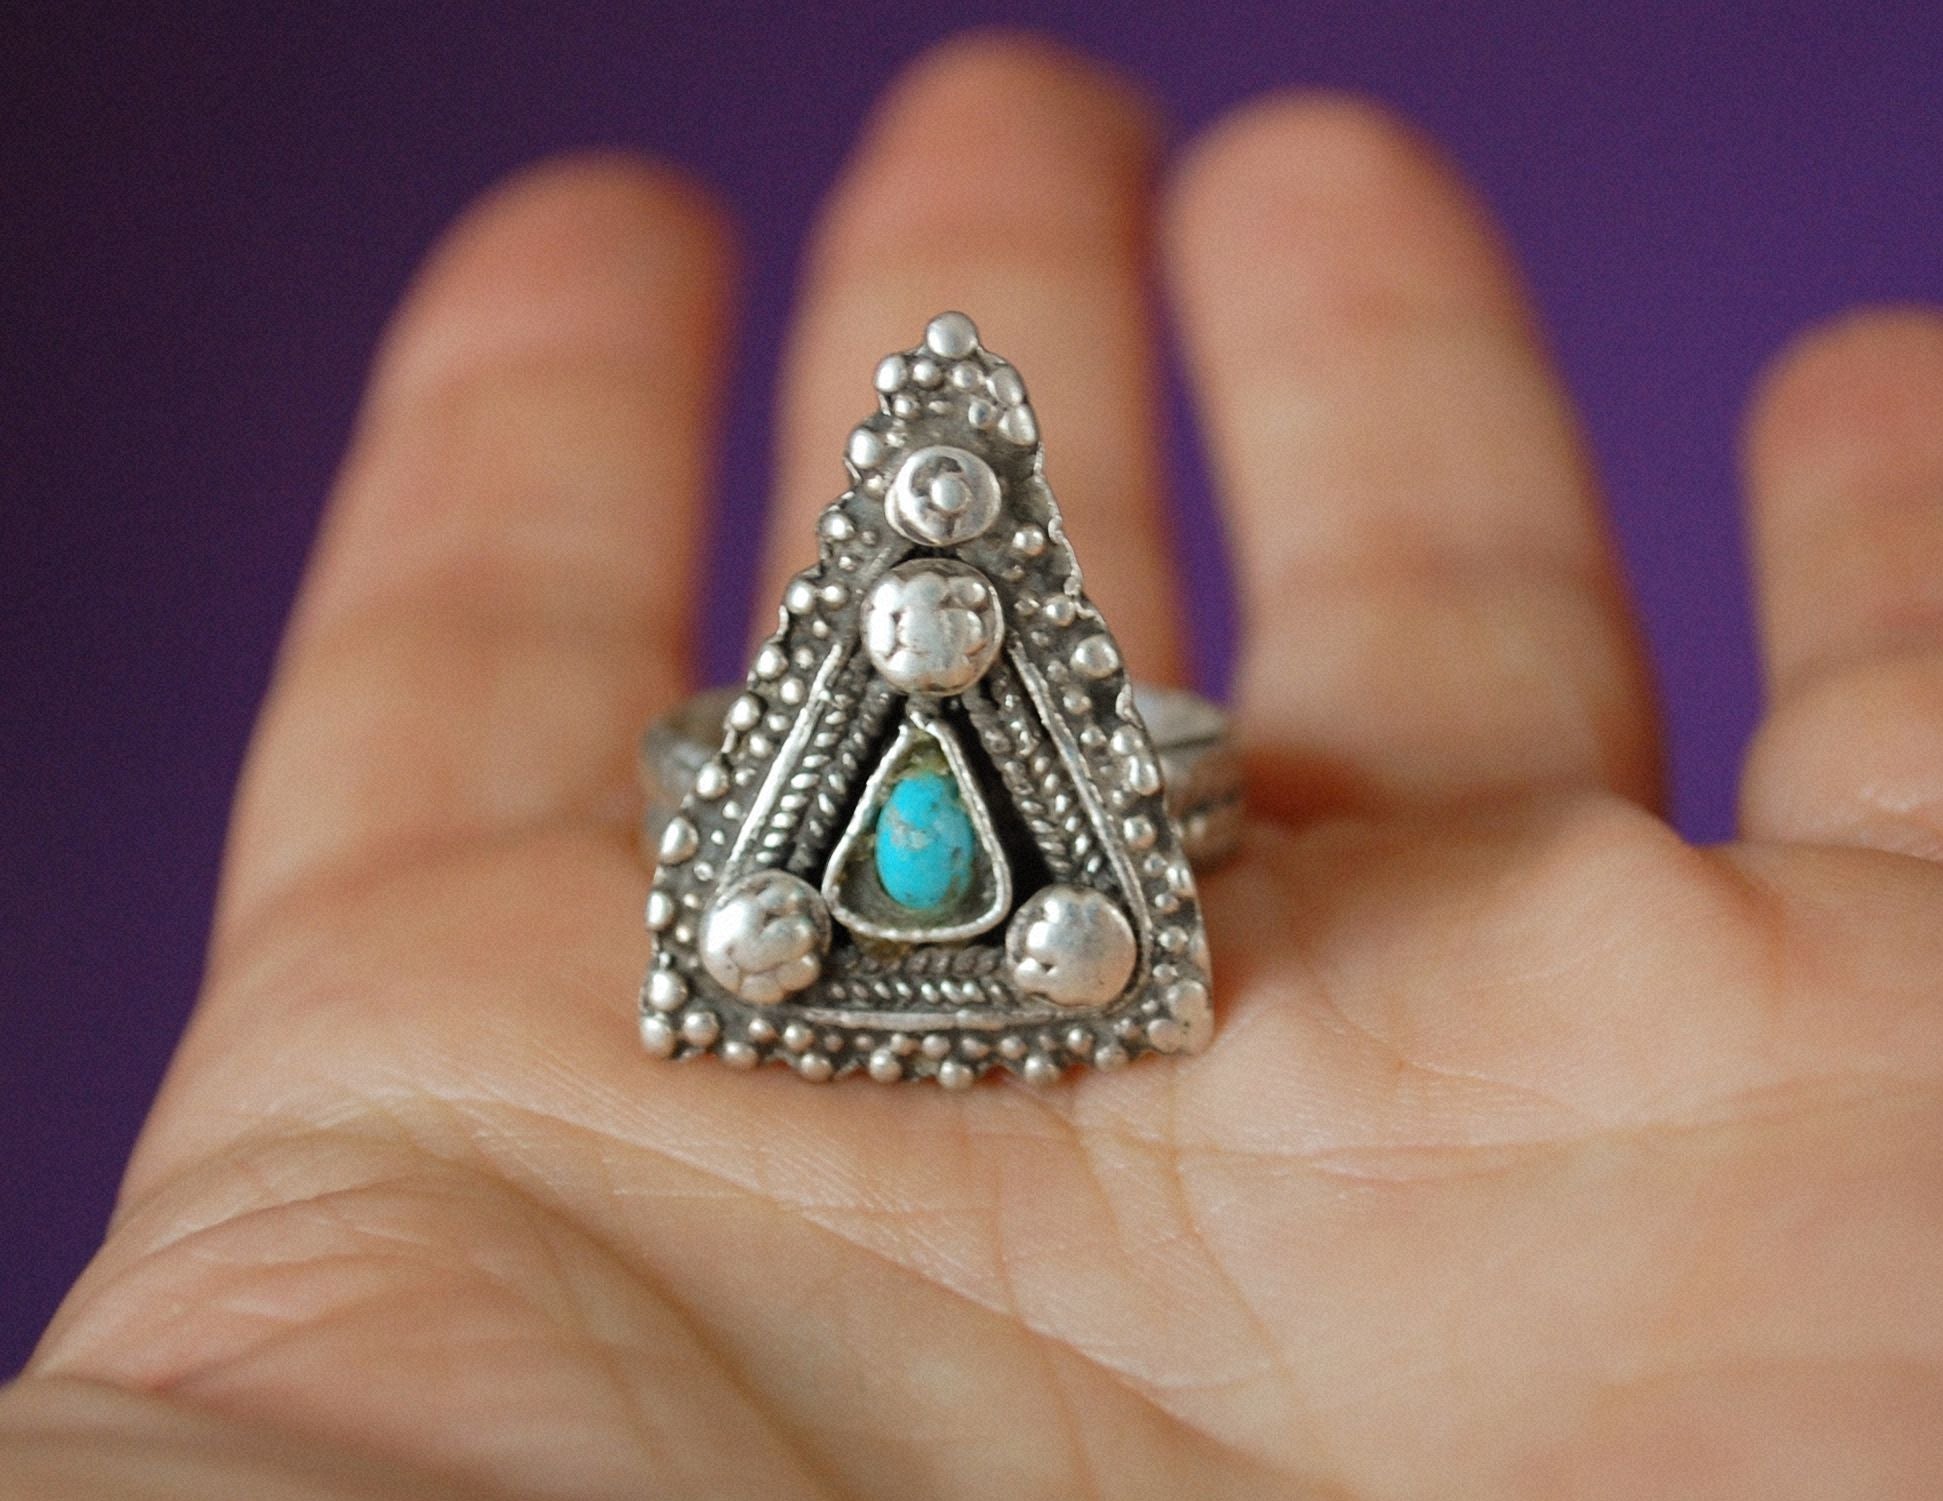 Antique Afghani Silver Ring with Turquoise - Size 8